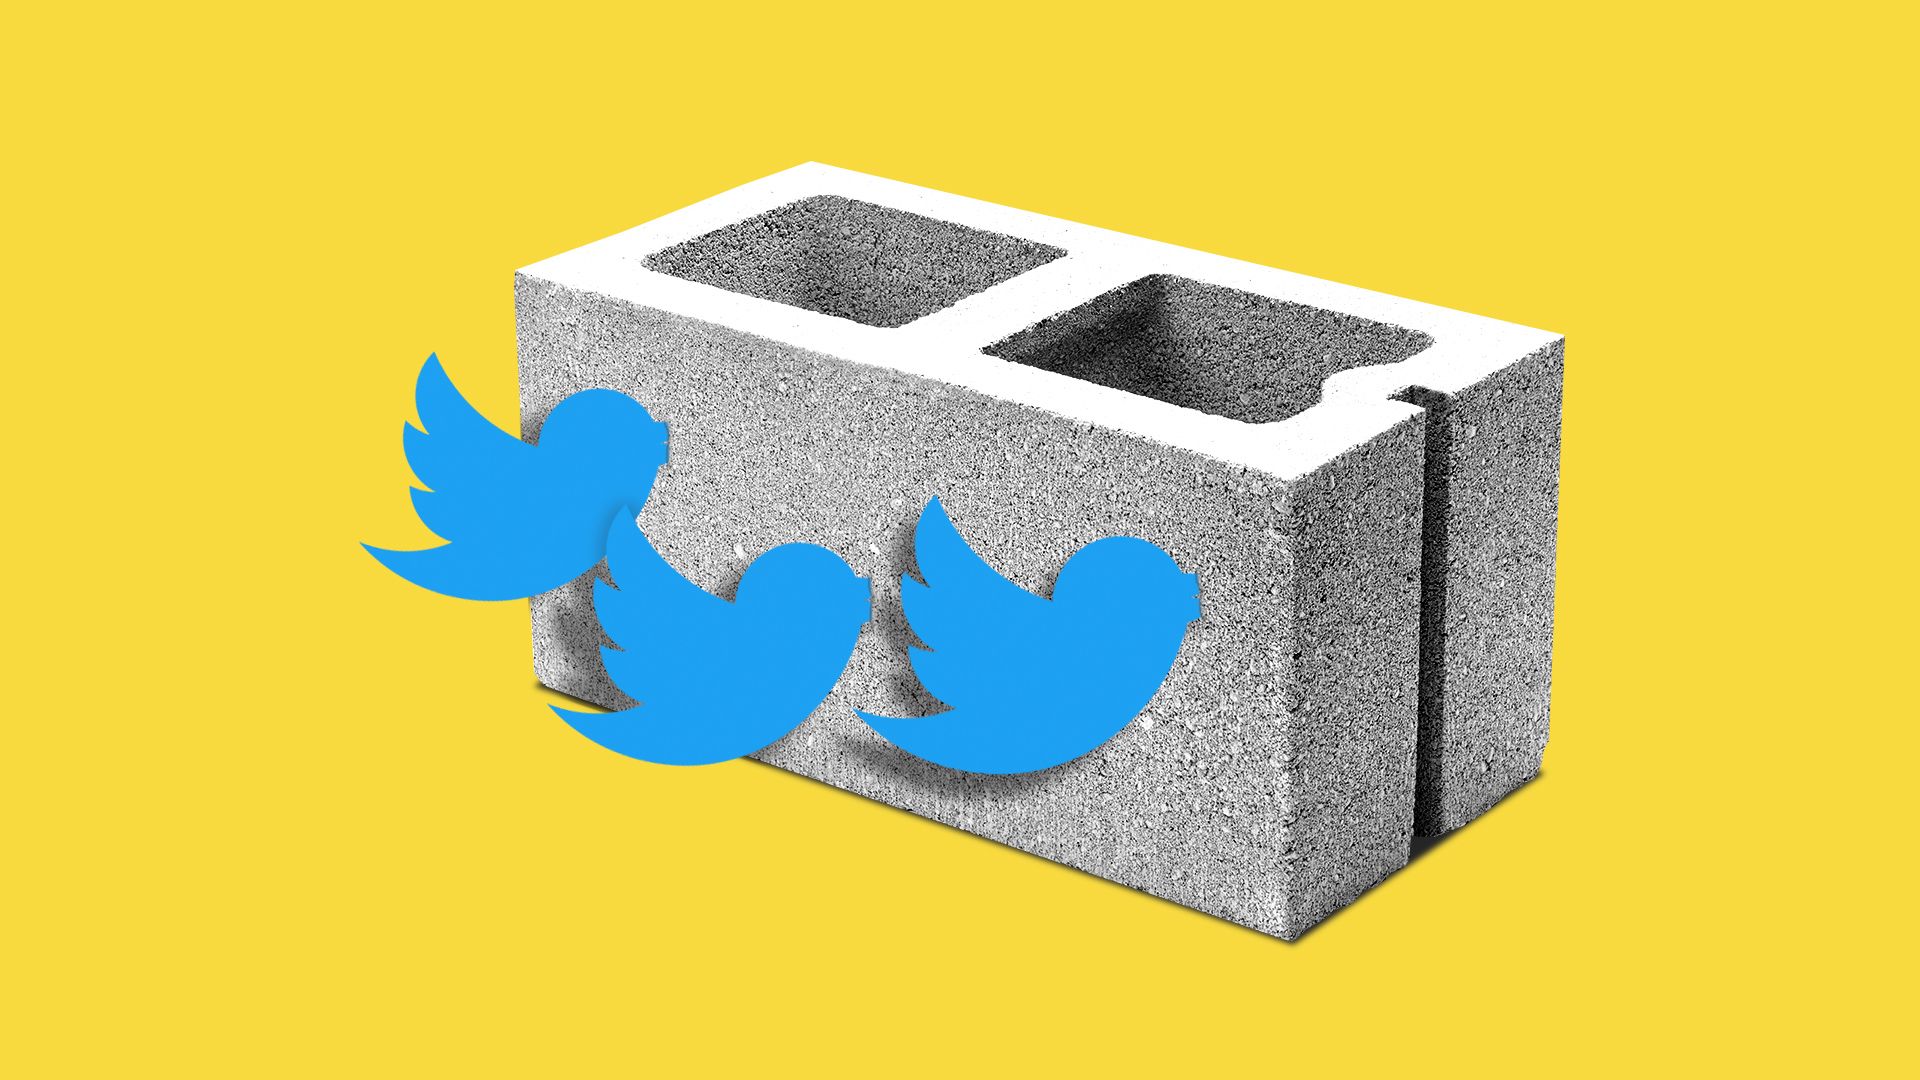 Three blue birds representing Twitter flying past a concrete block.